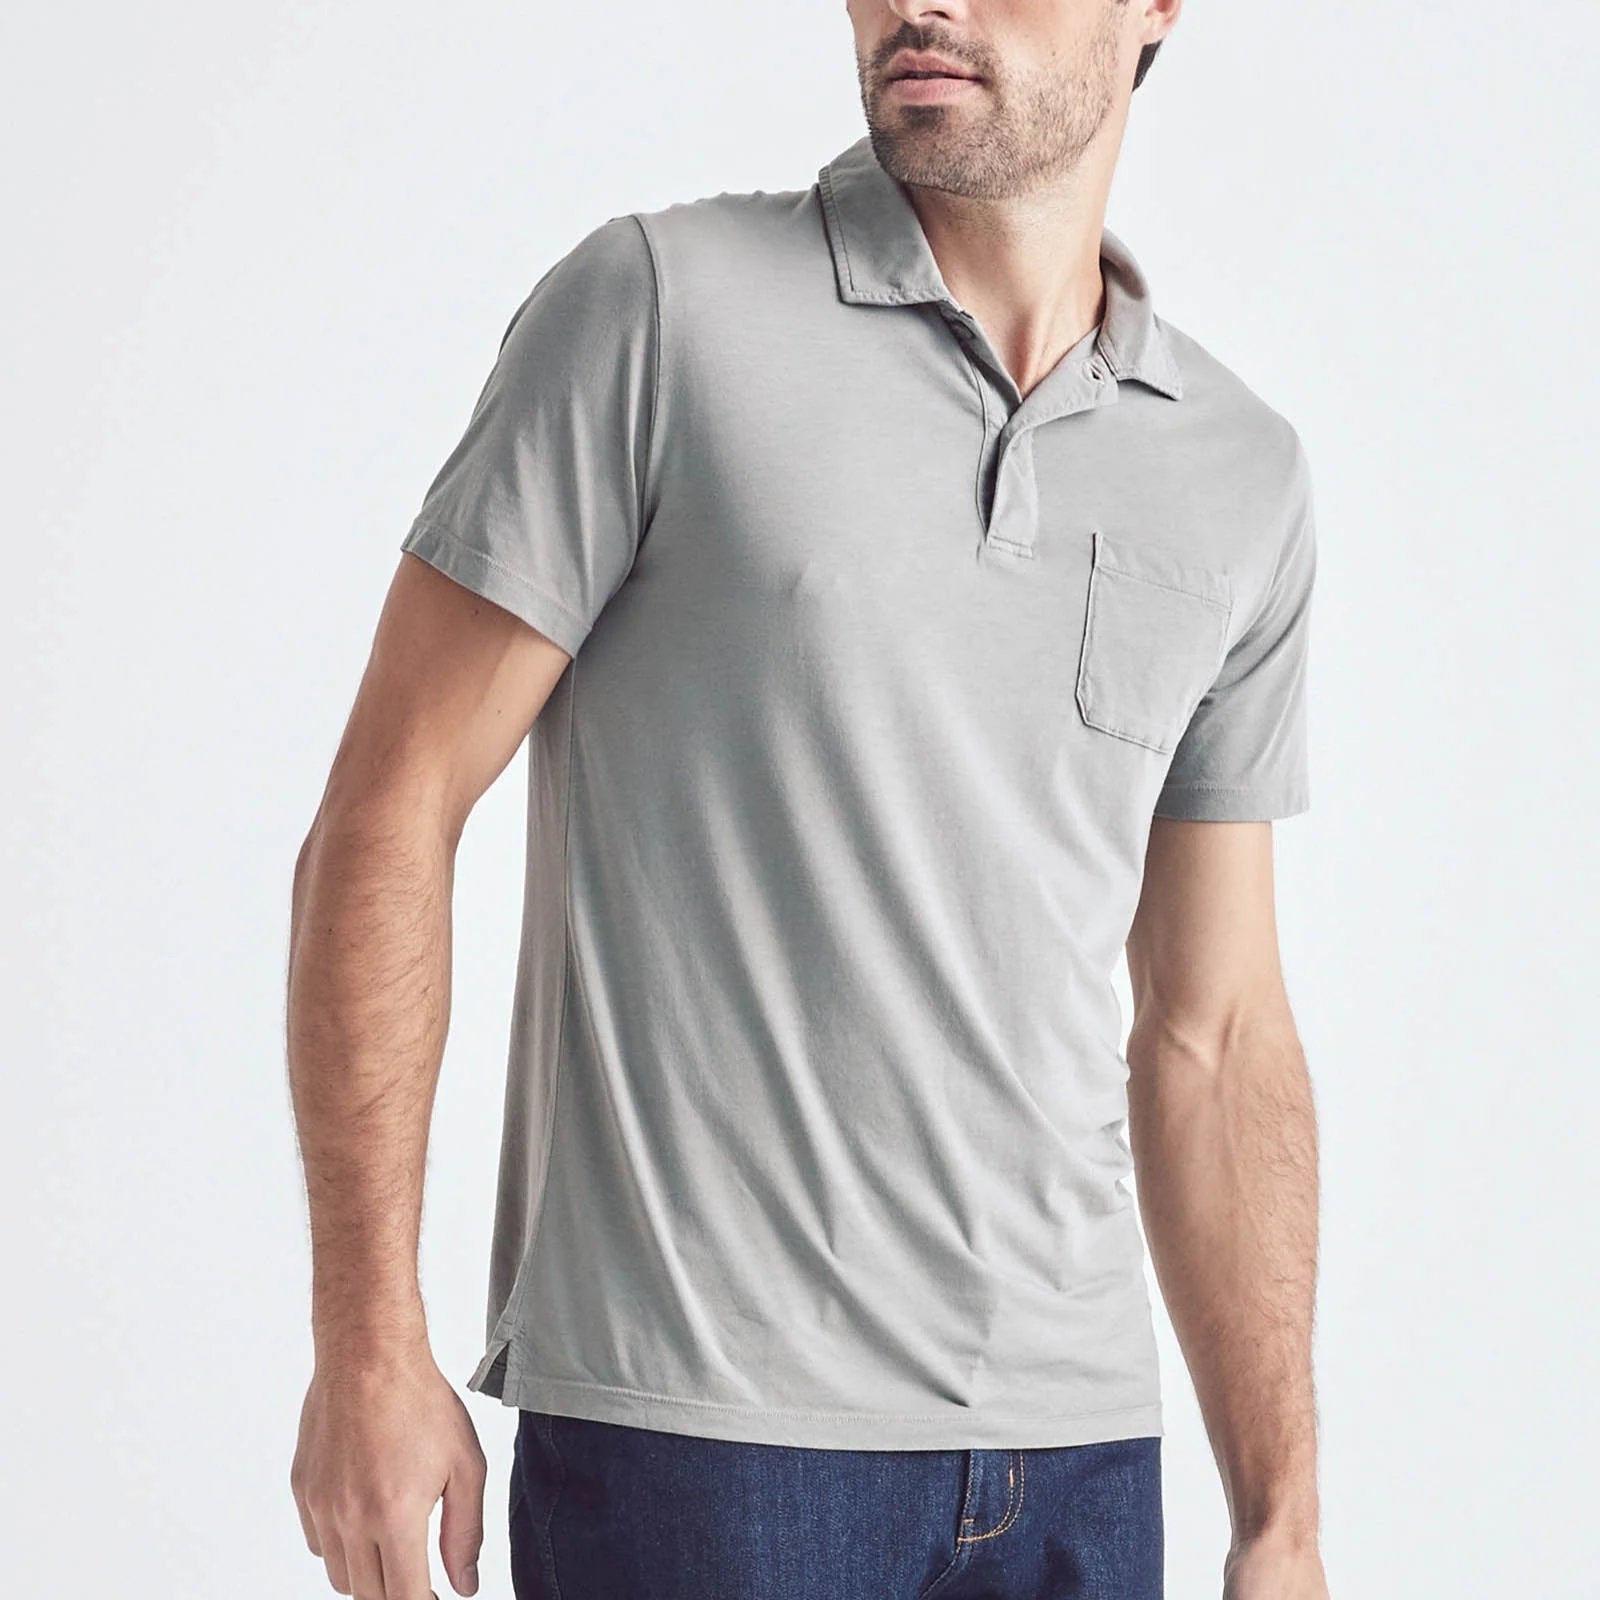 'Du/er The Dura-Soft Only Polo' in 'Gull' colour